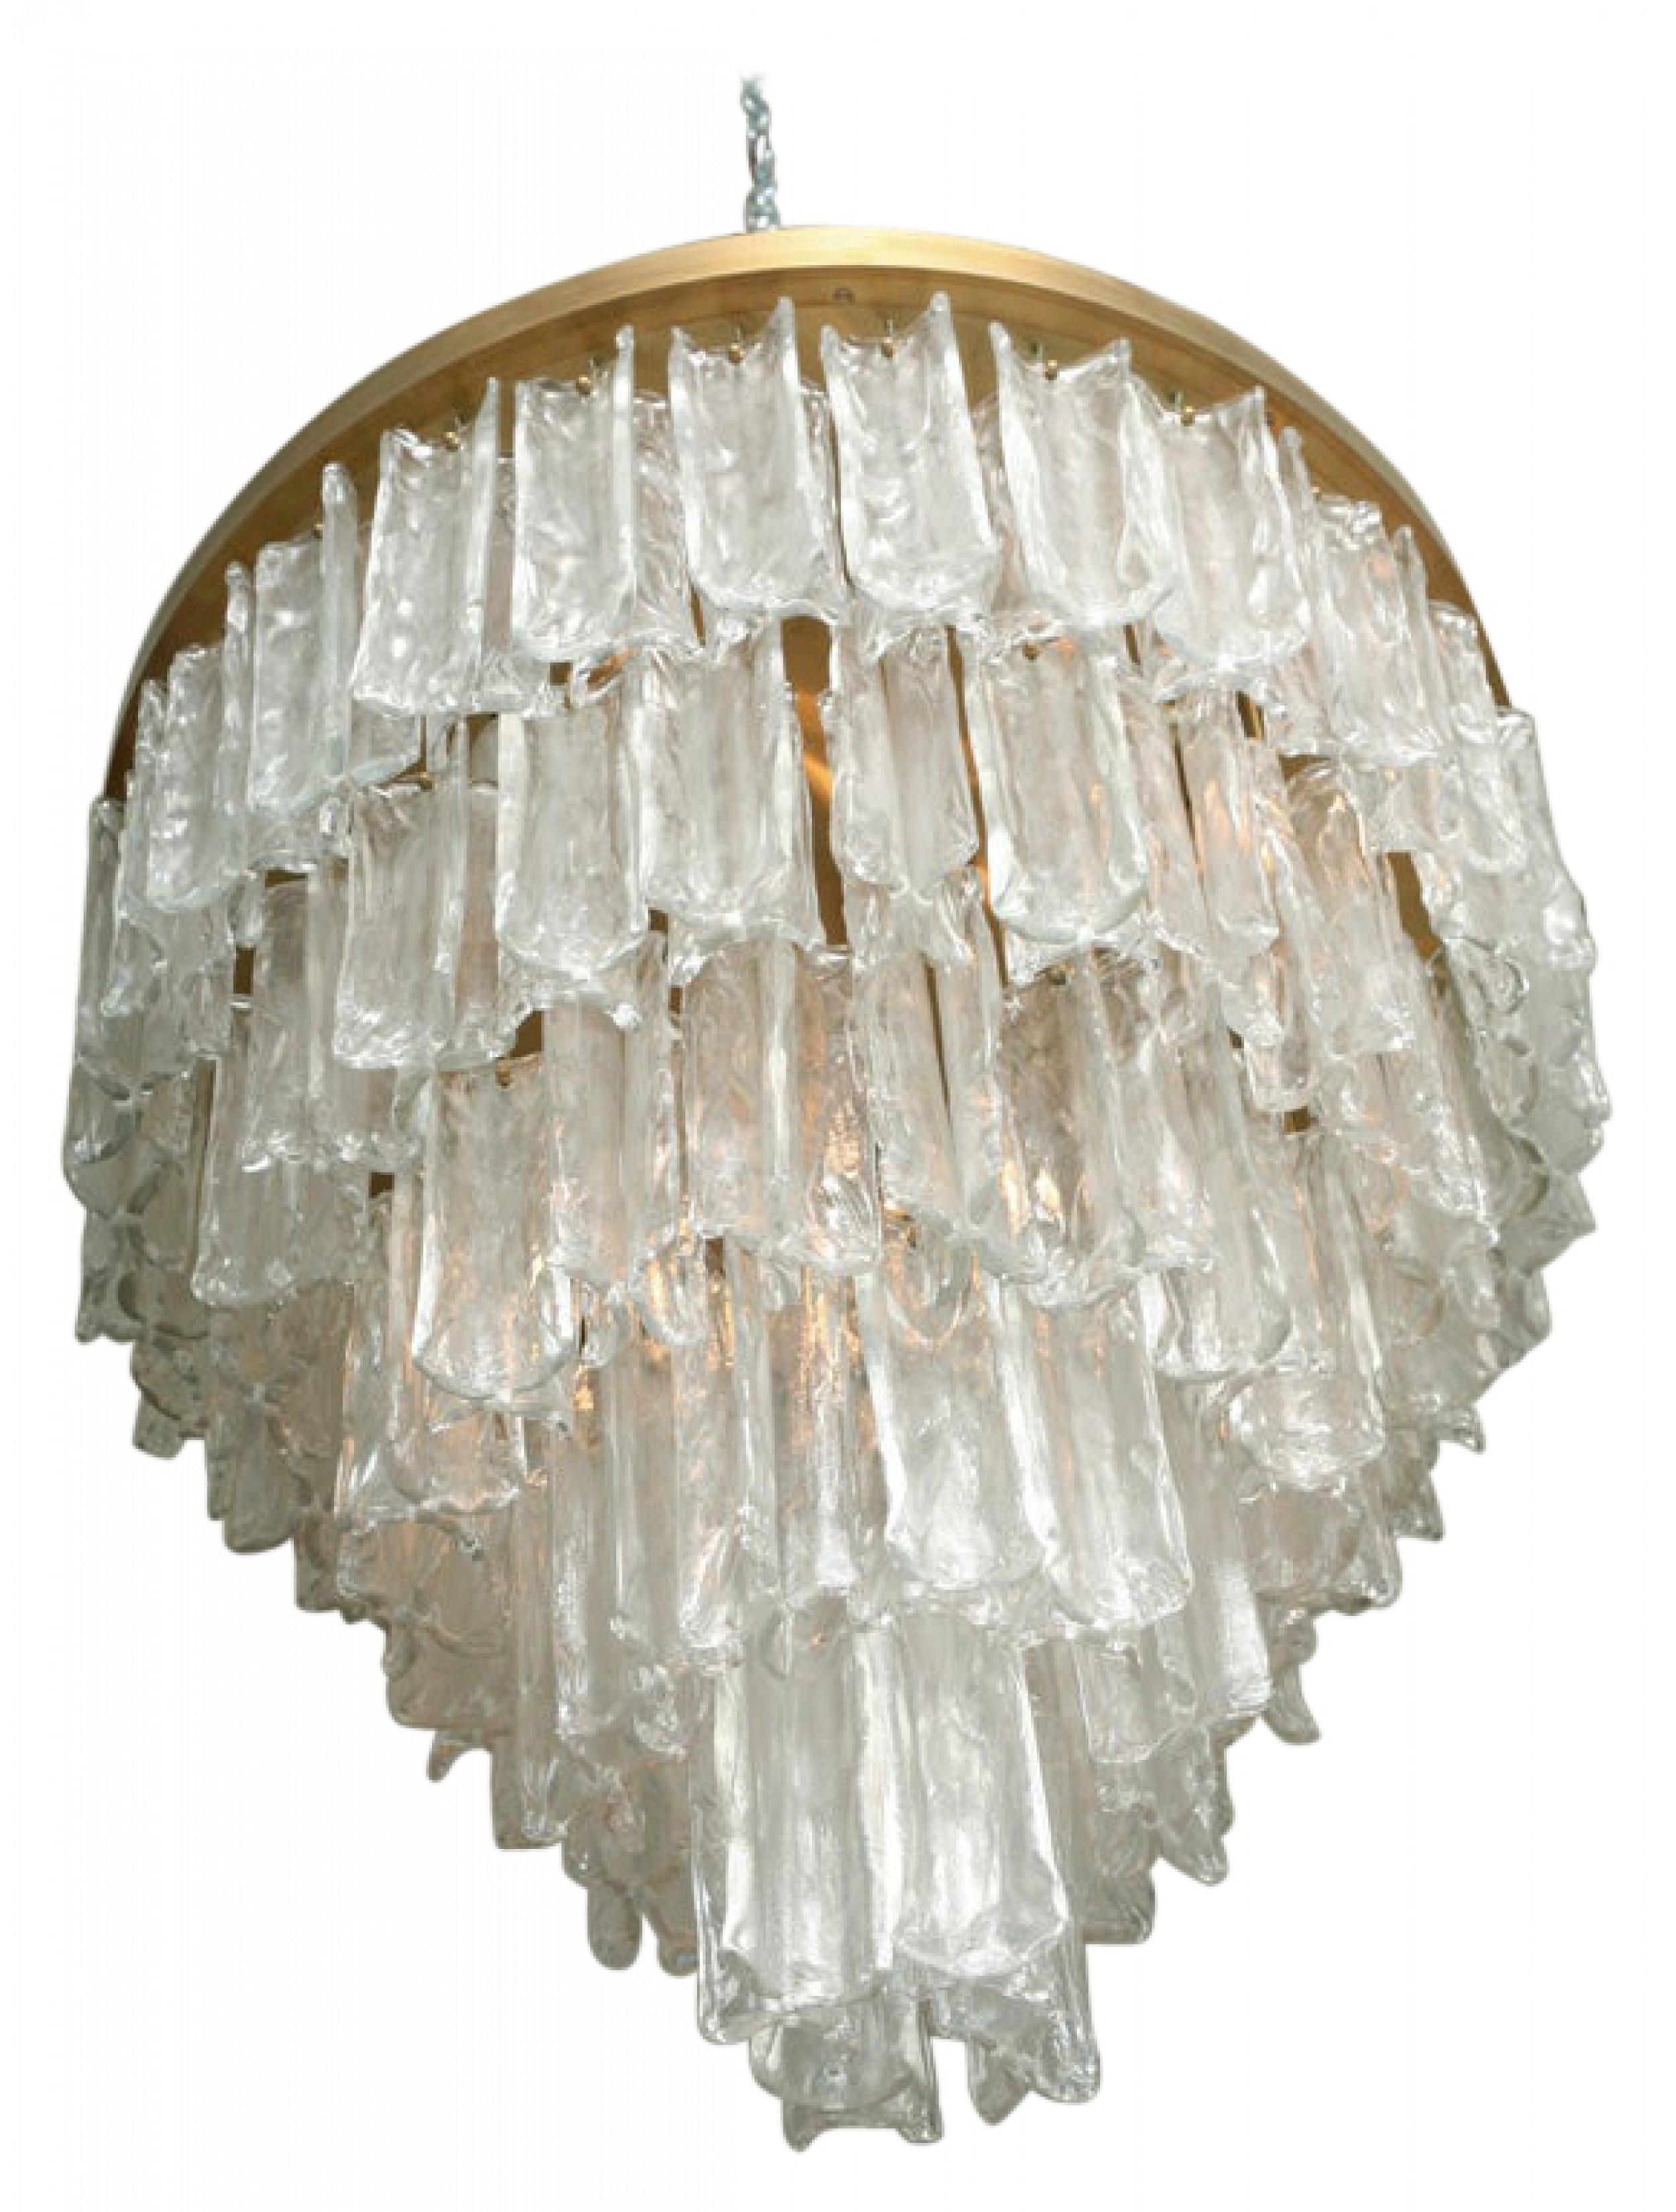 Fine Venini Handblown Glass and Brass Chandelier In Good Condition For Sale In New York, NY